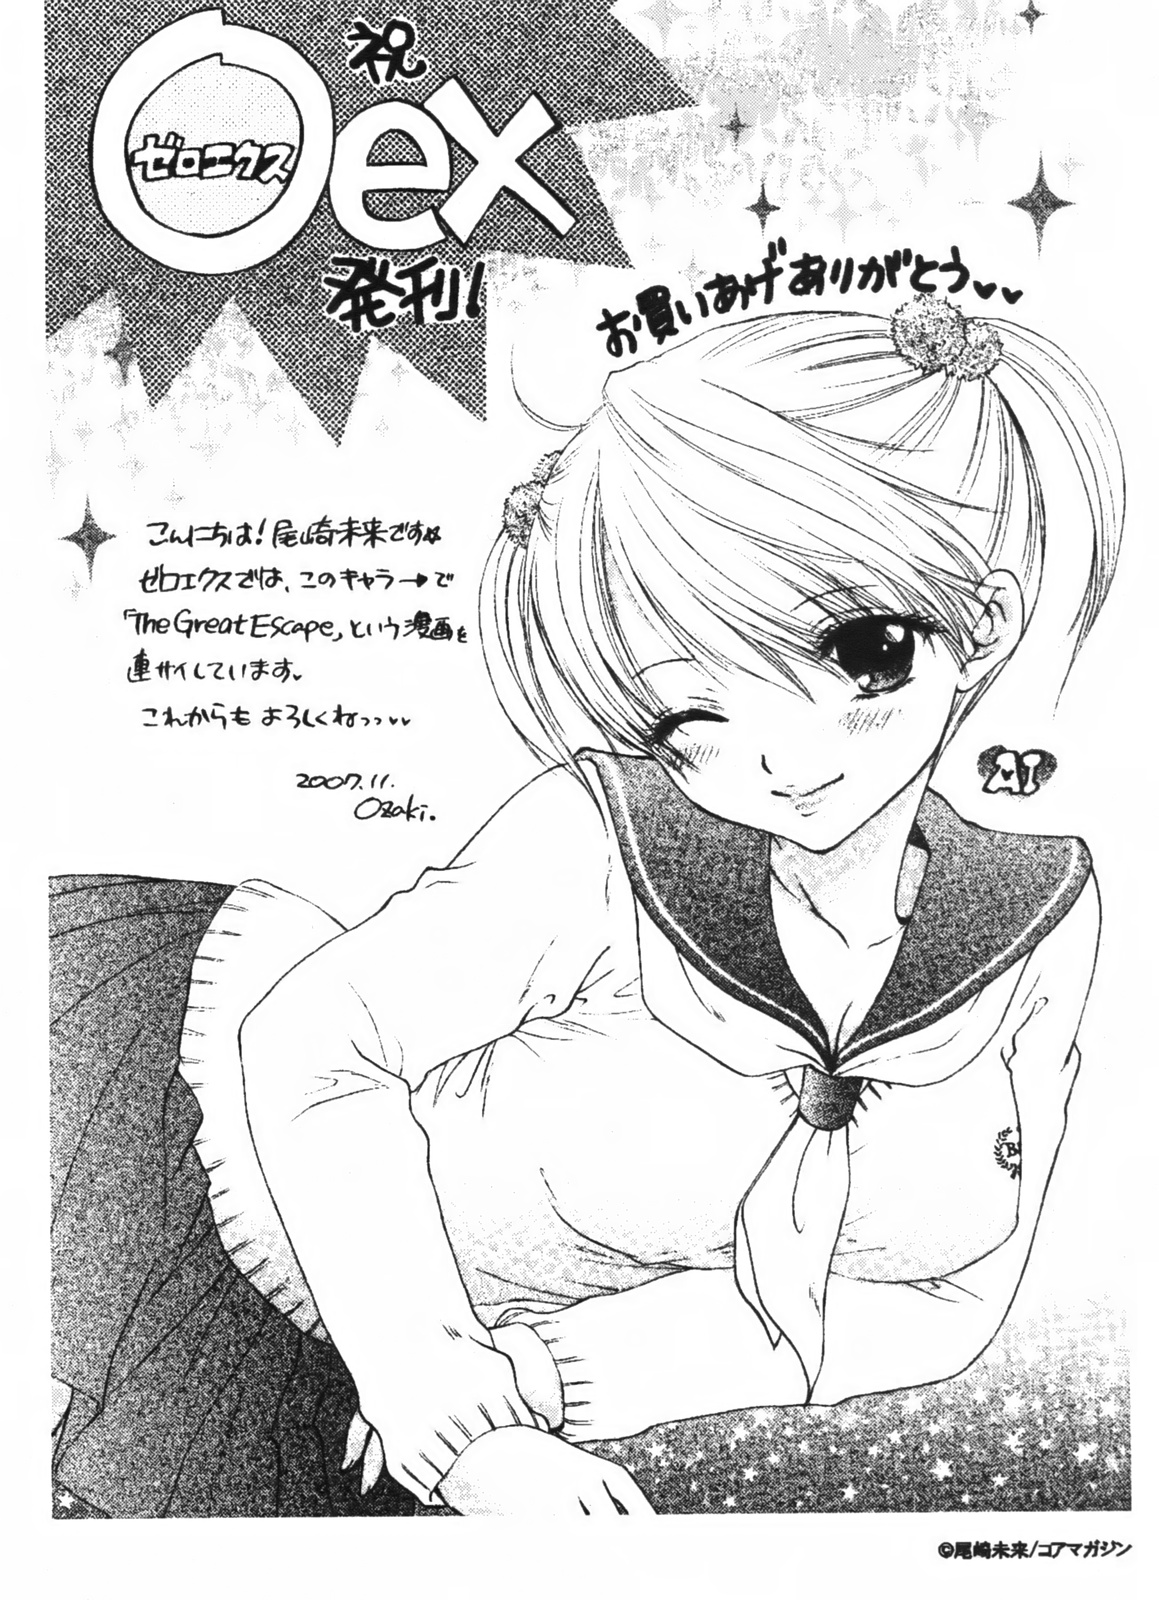 COMIC 0EX vol.01 2008-01 - Toranoana Message Paper Collection page 6 full